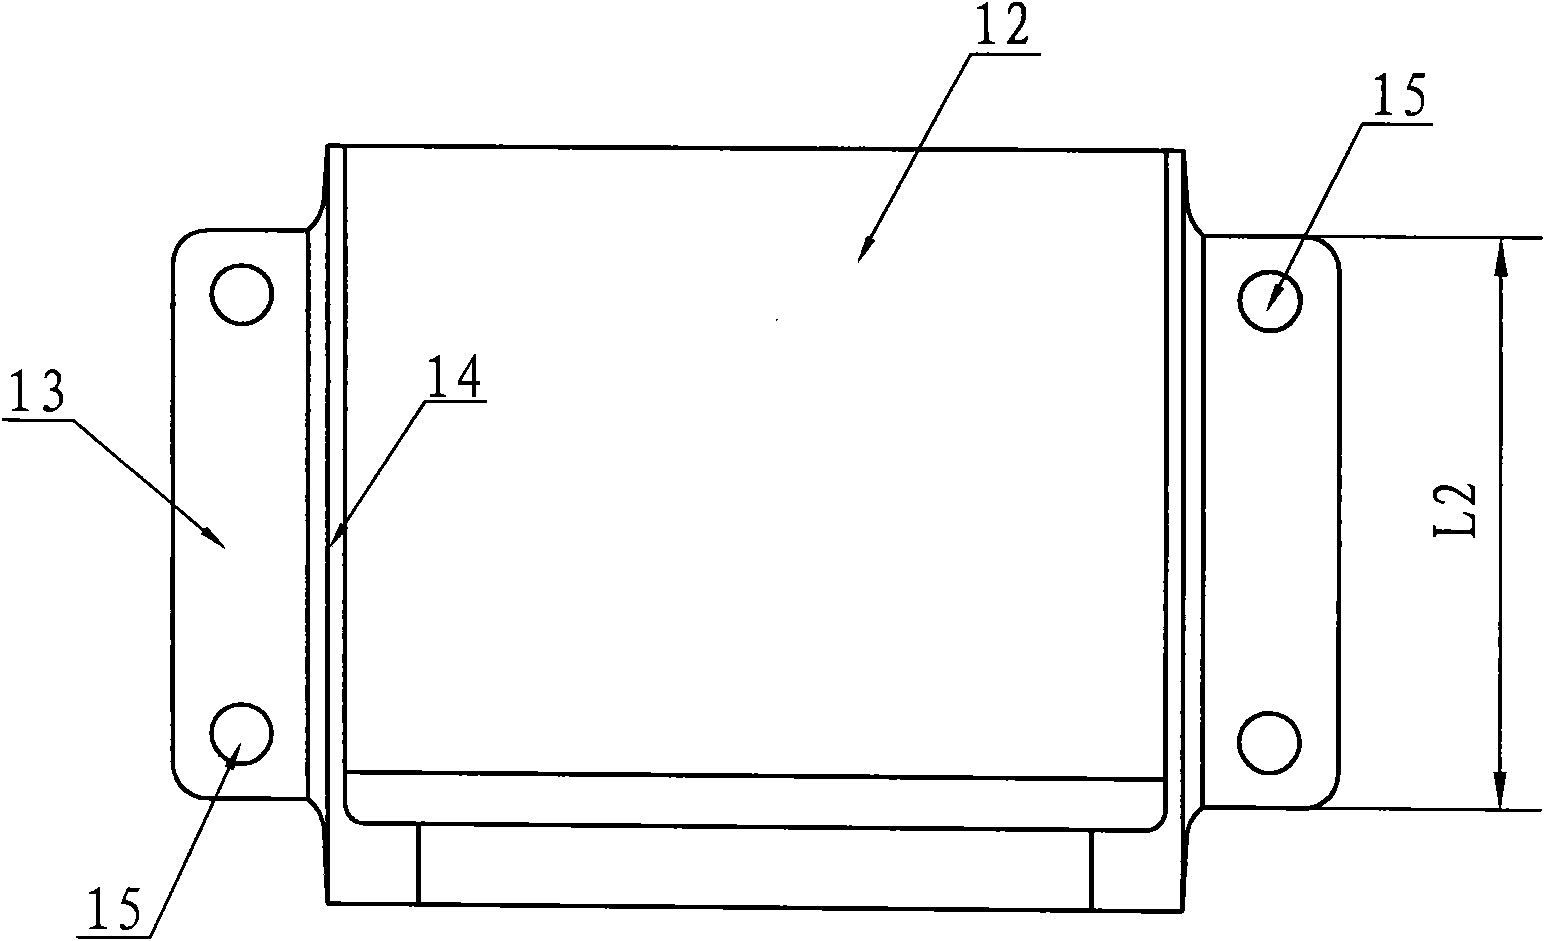 Compound fixture for processing matched seam allowance on upper body of motor car bogie axle box